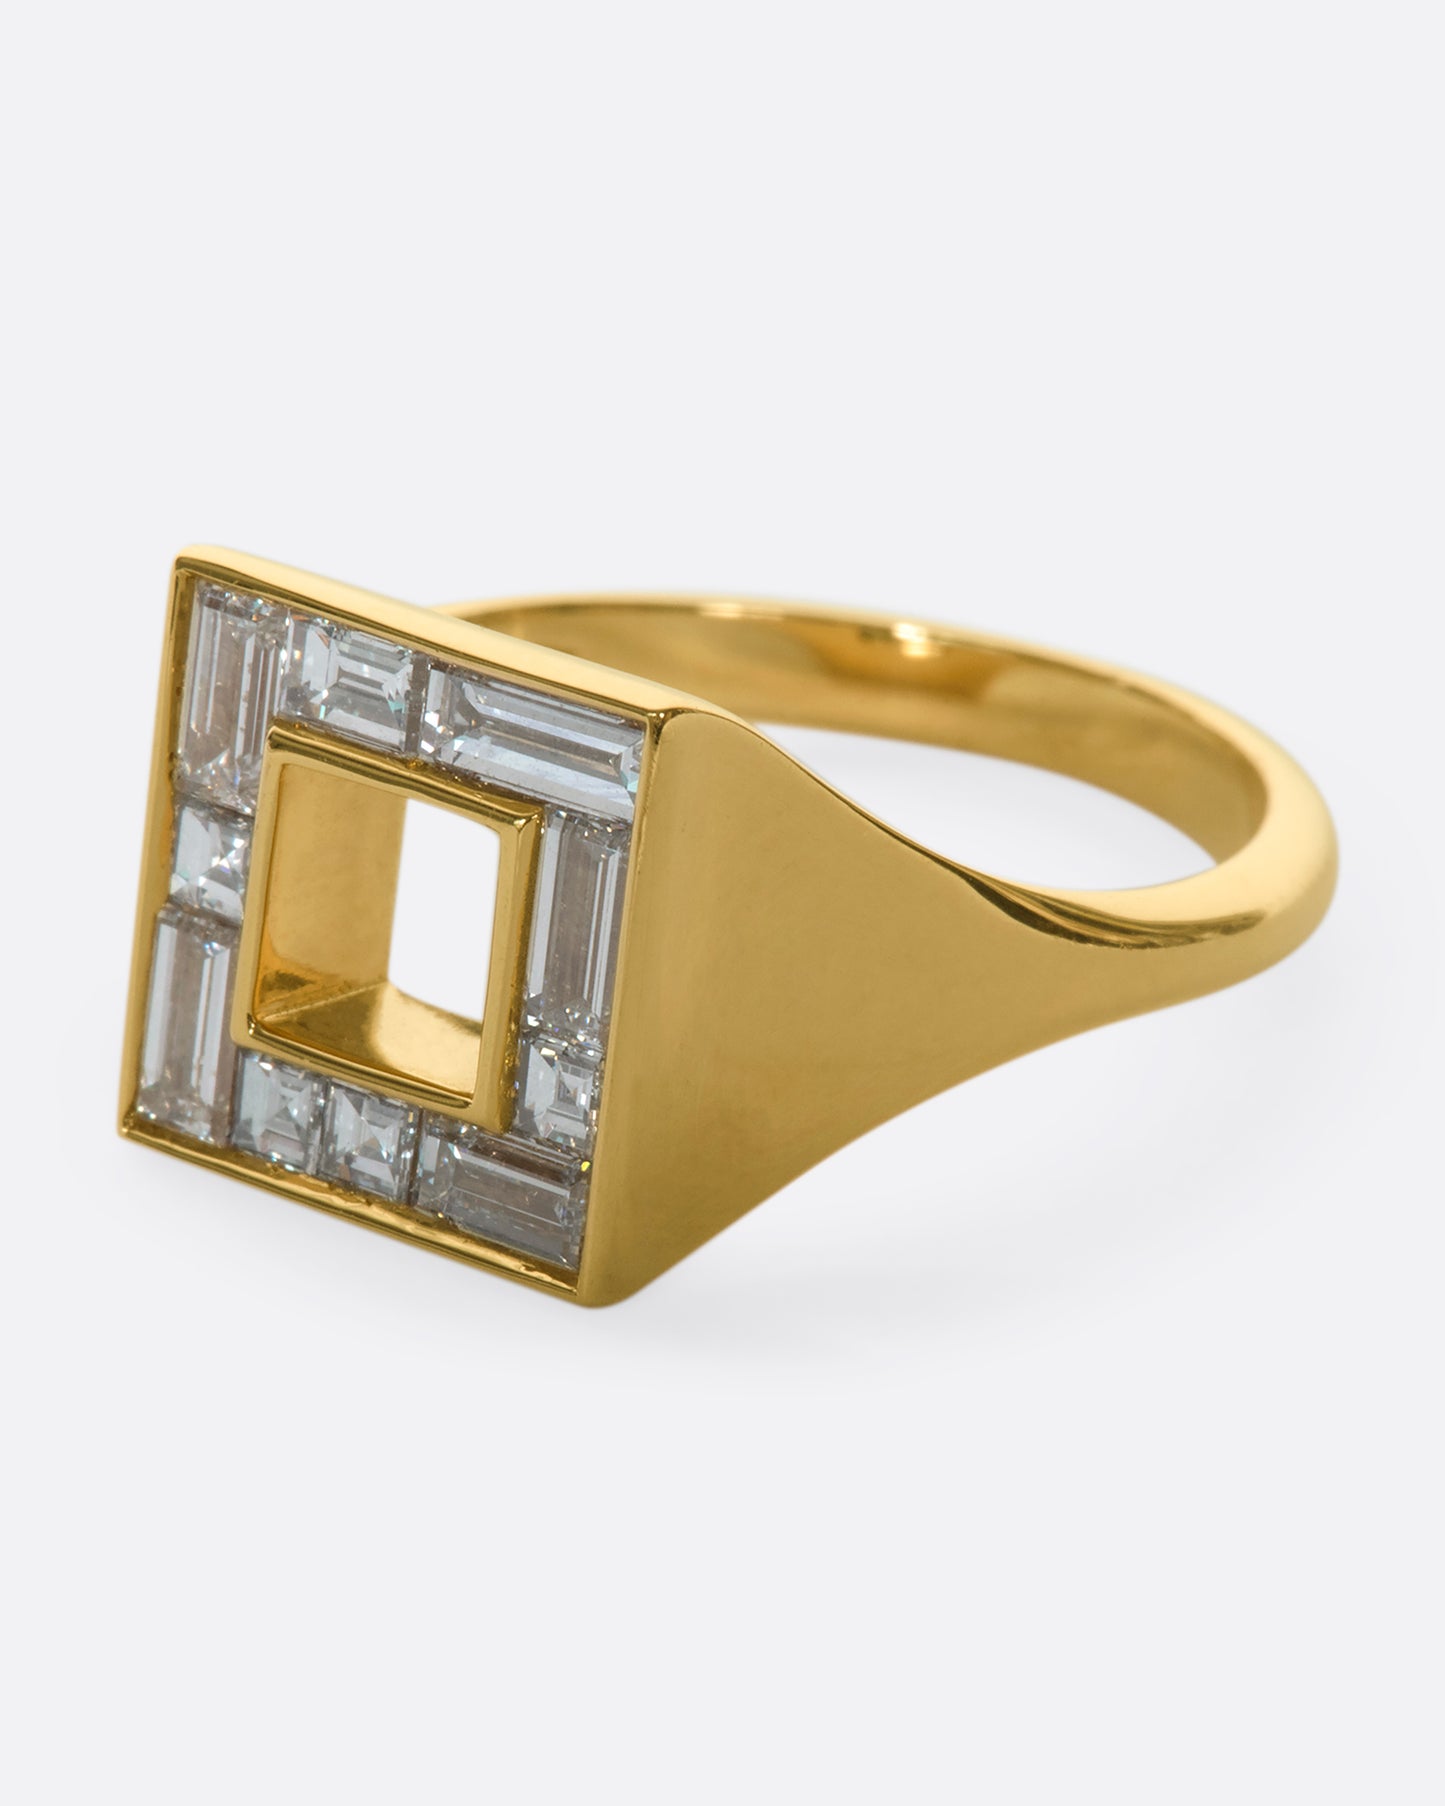 A close up of the left side of a square ring set with baguette diamonds.